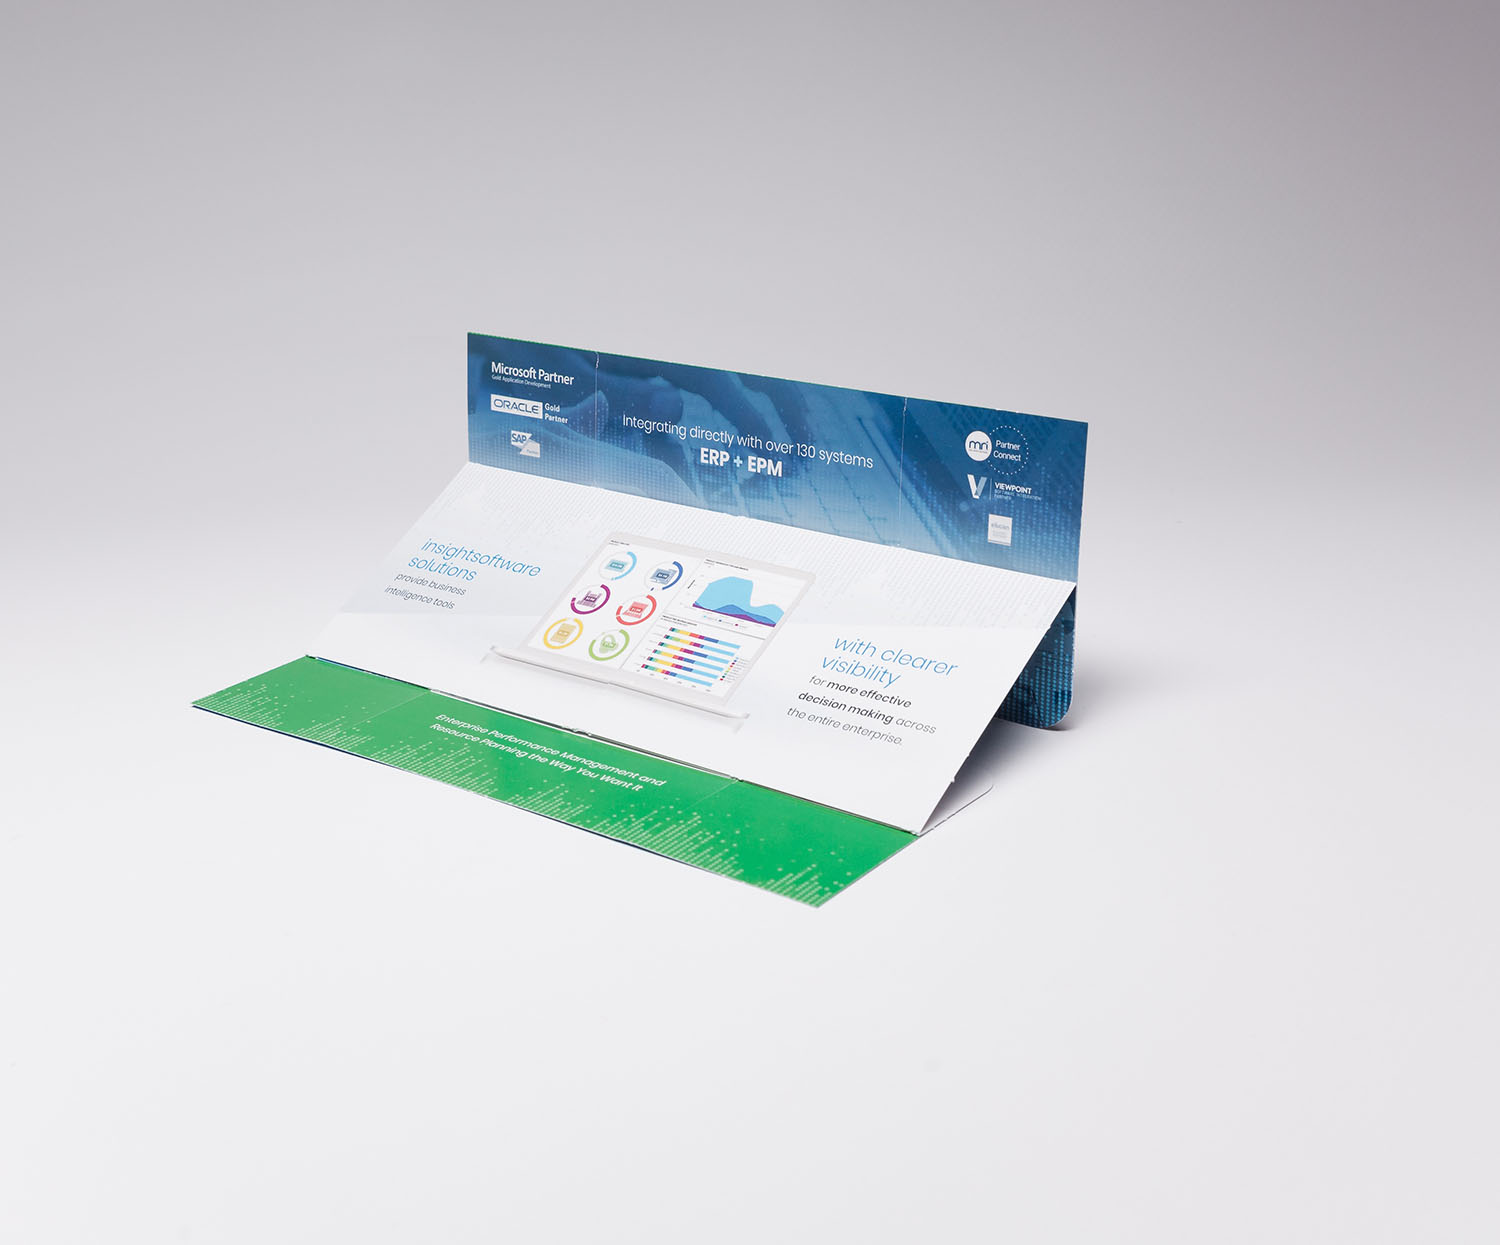 Make sure your companies rebranding is heard, our direct mail marketing flappers are sure to grab attention